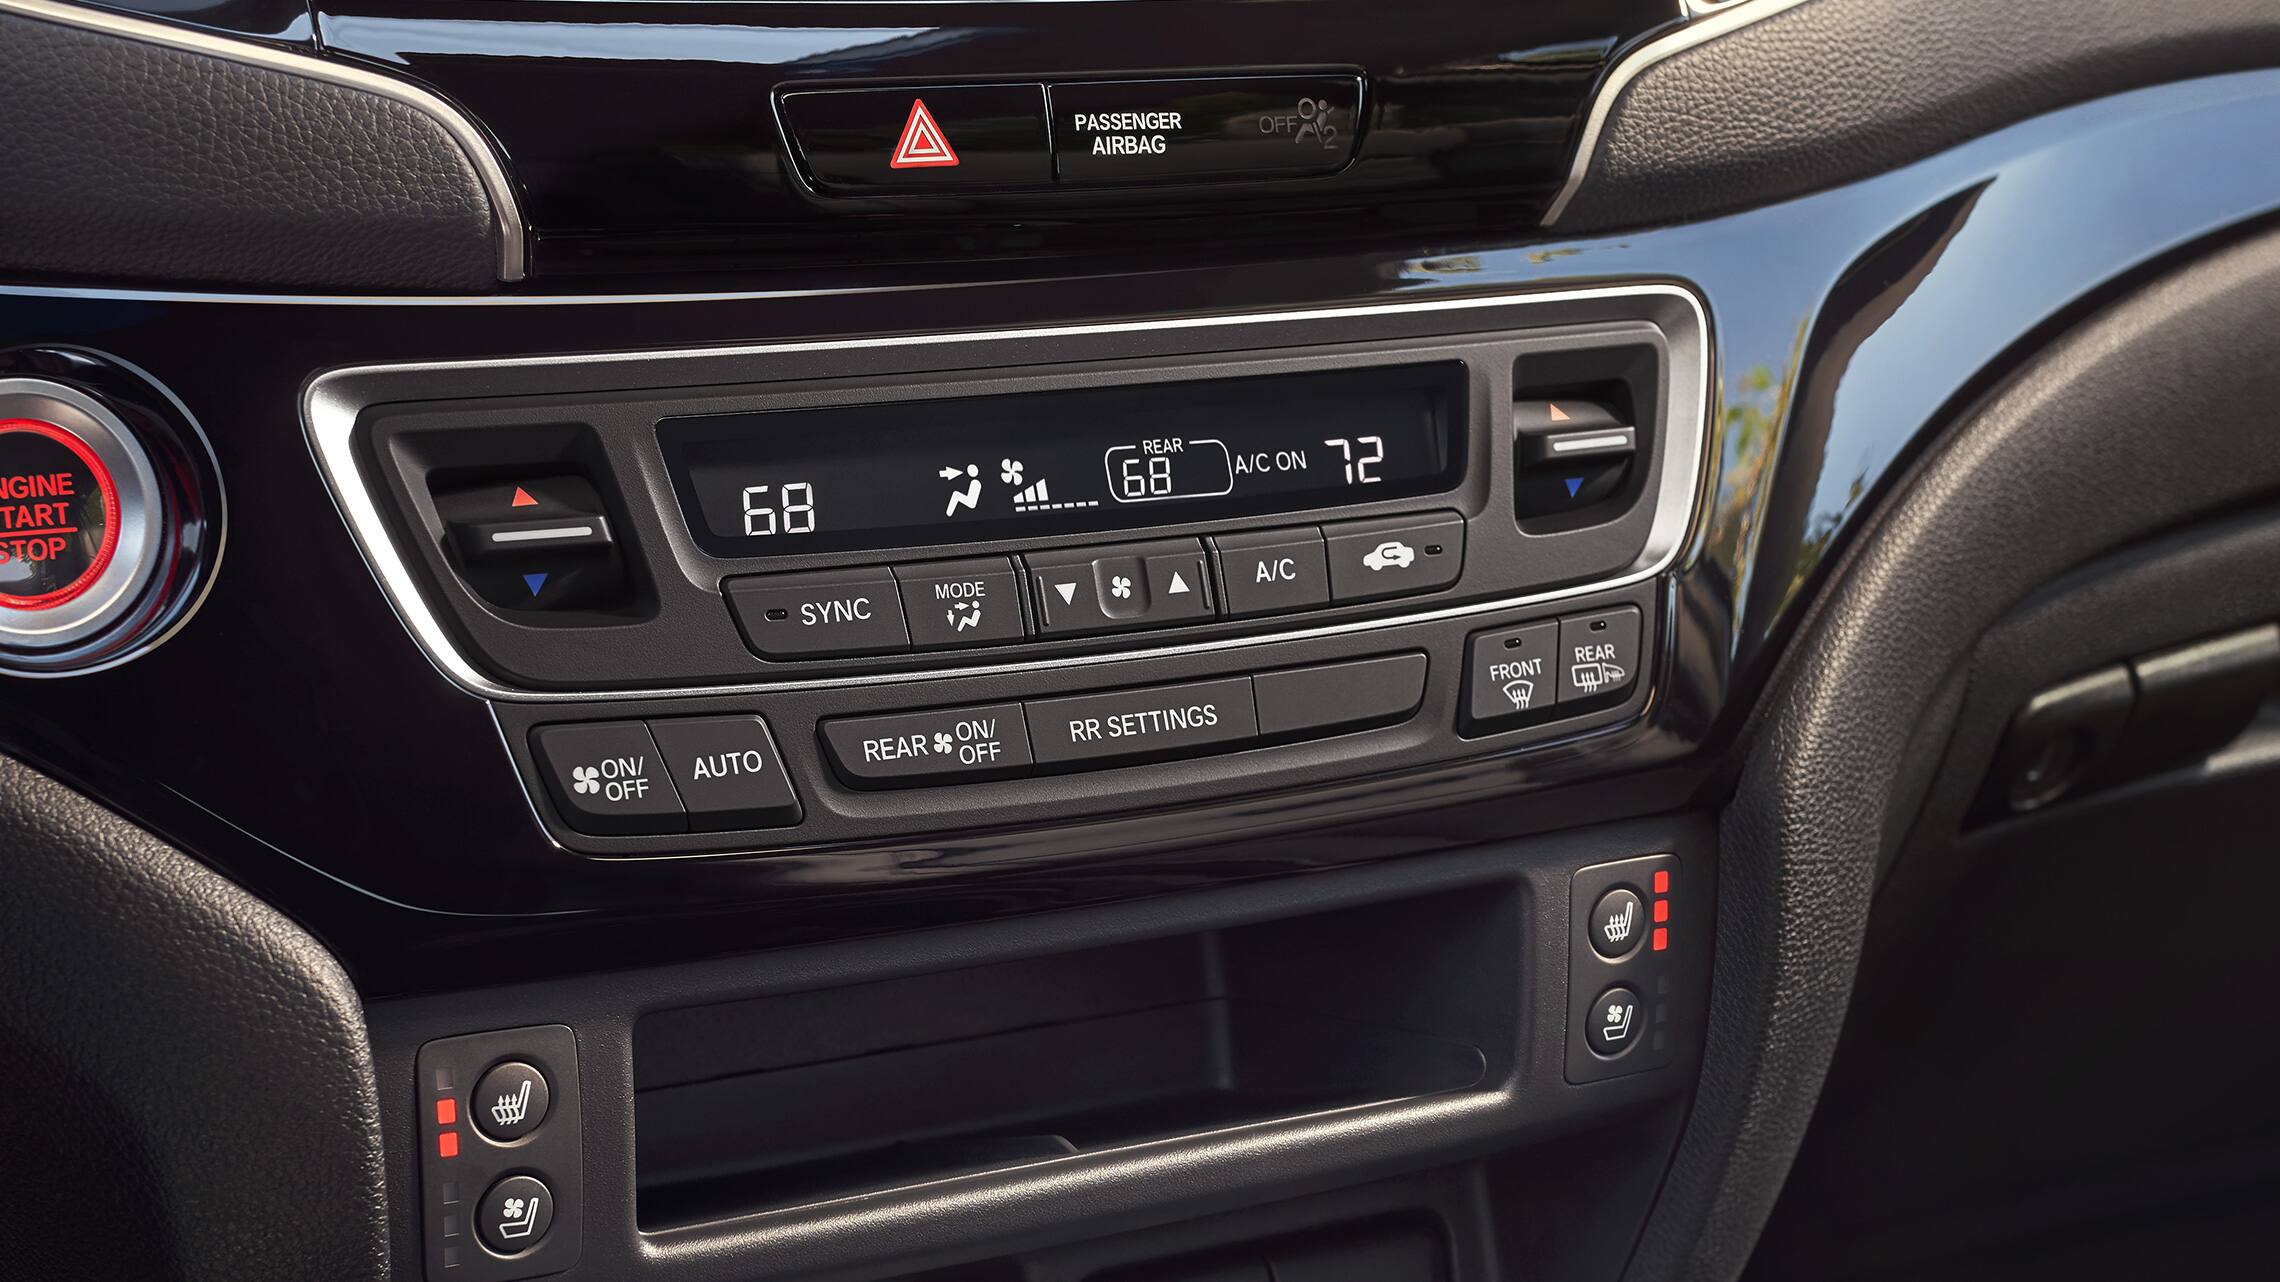 Tri-zone climate control detail on the 2019 Honda Passport Elite with Black Leather interior.